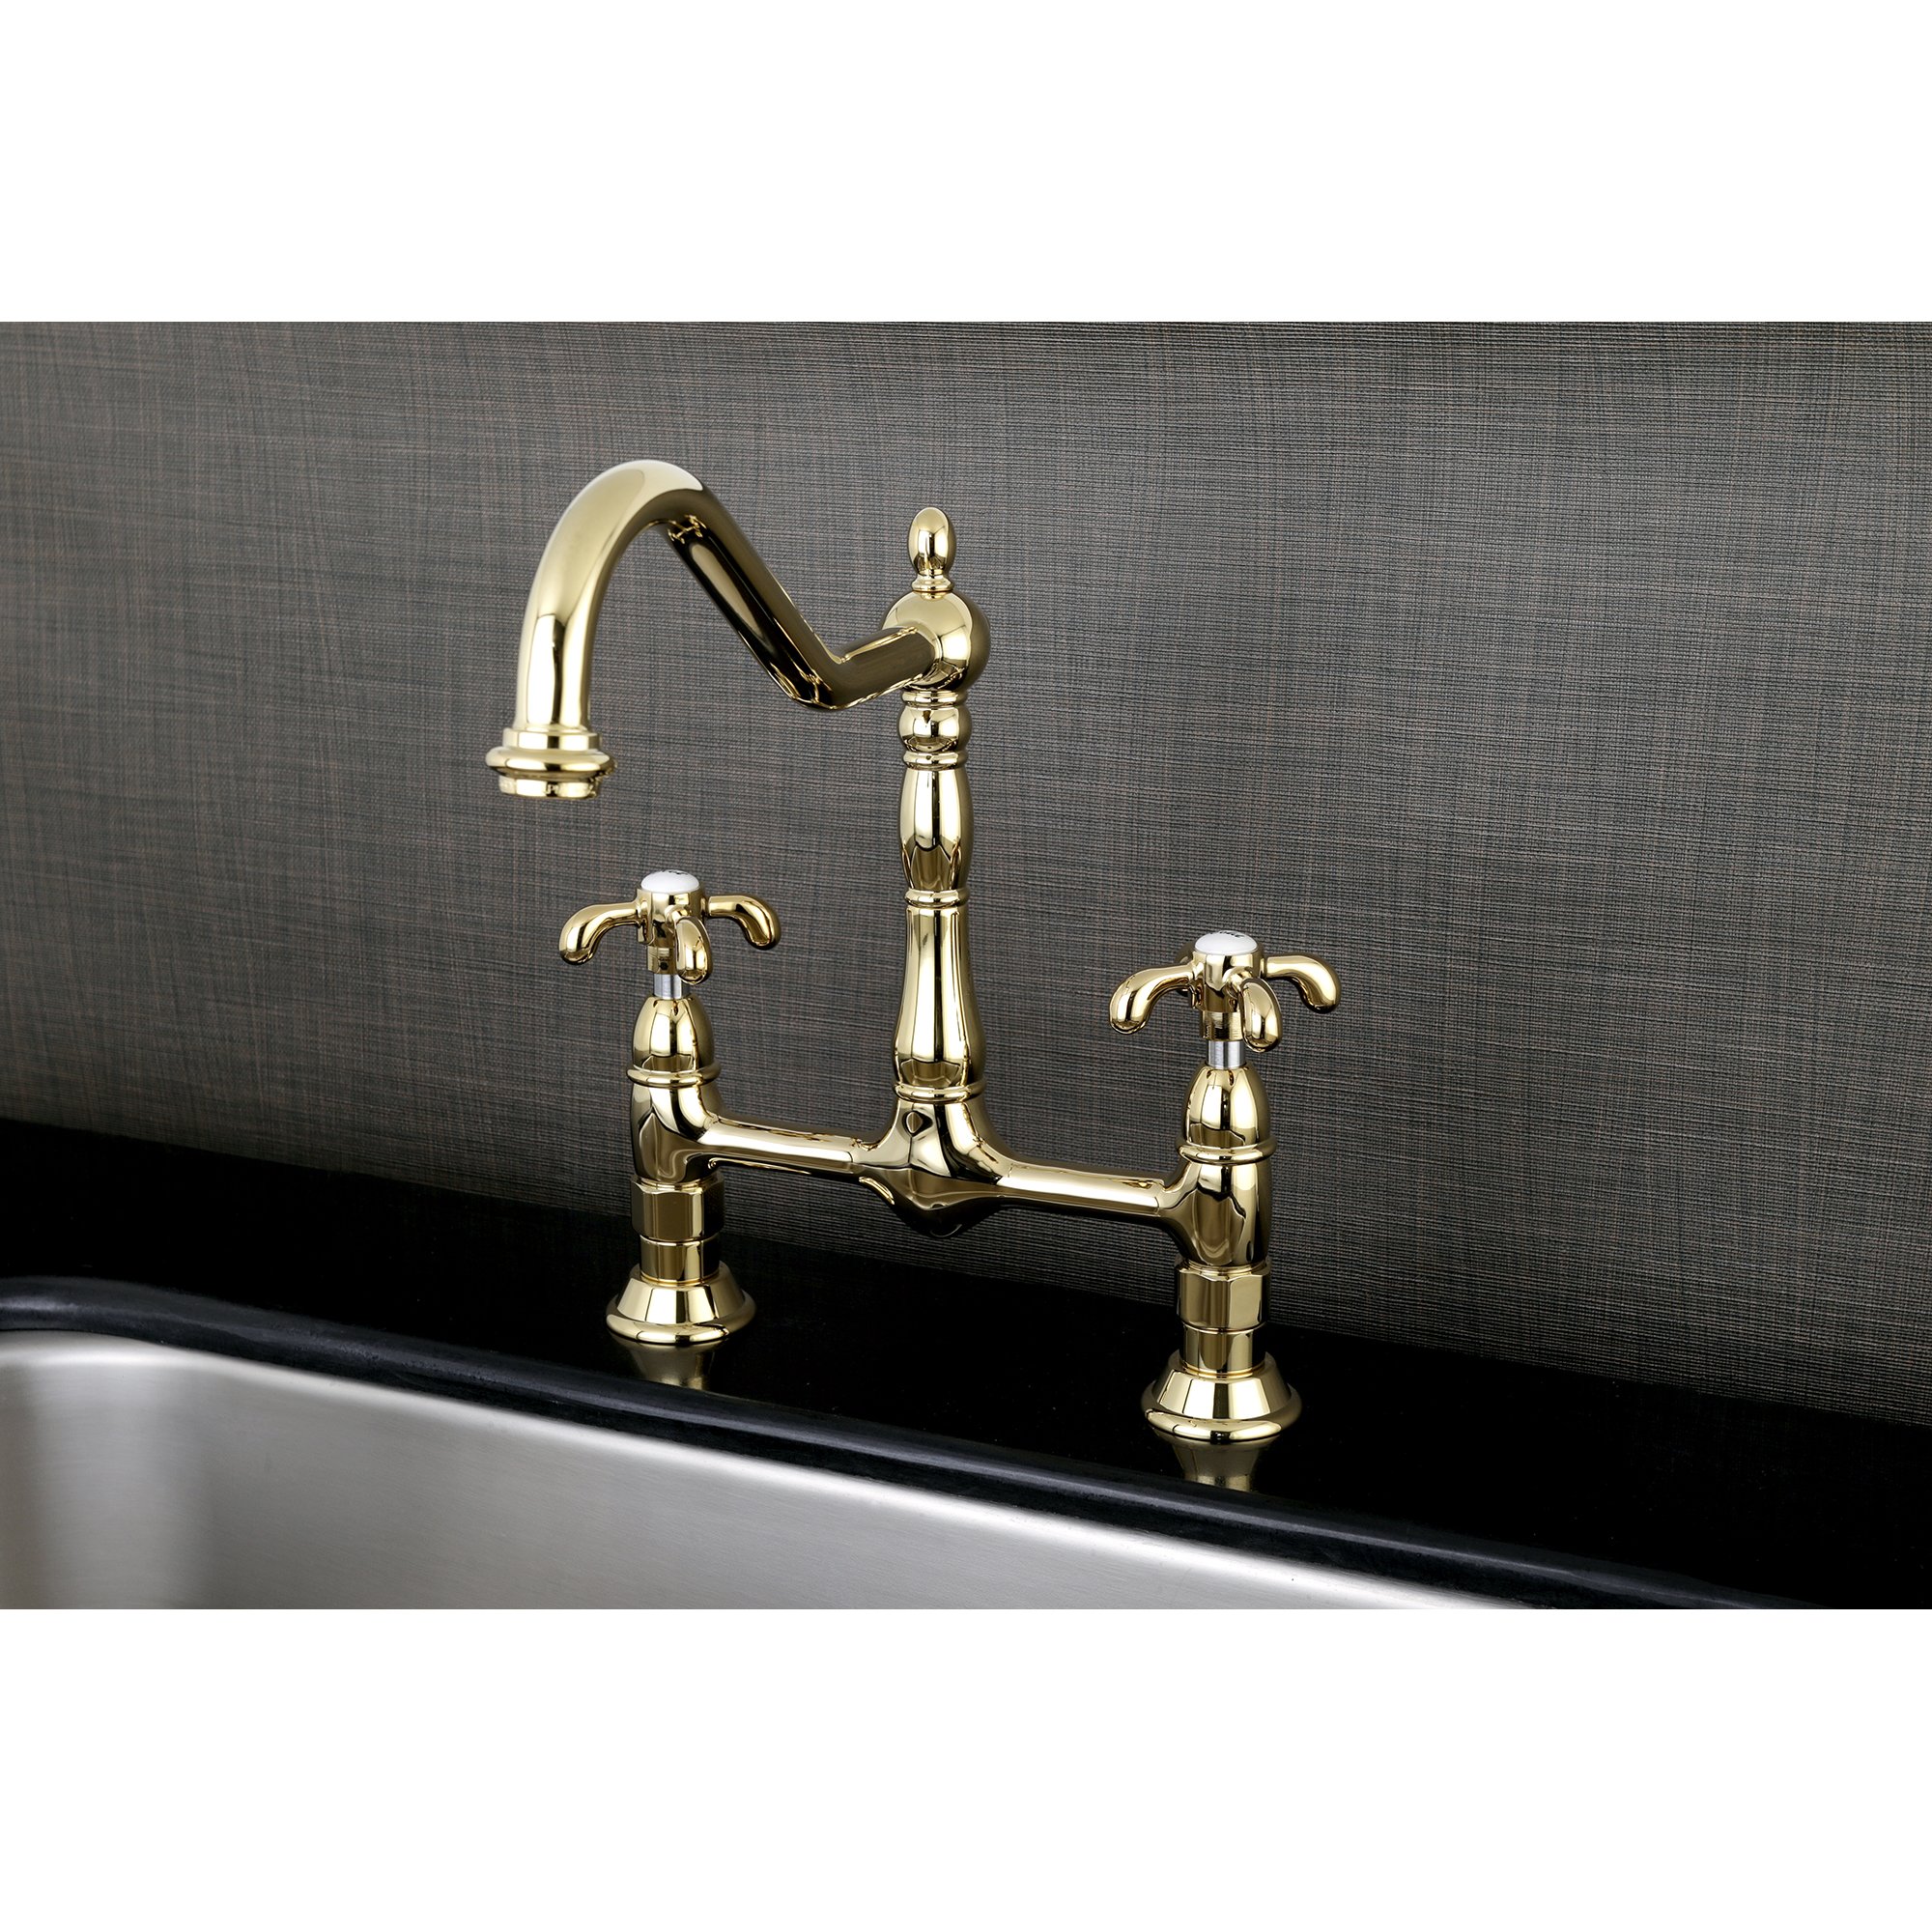 french country kitchen faucet photo - 7